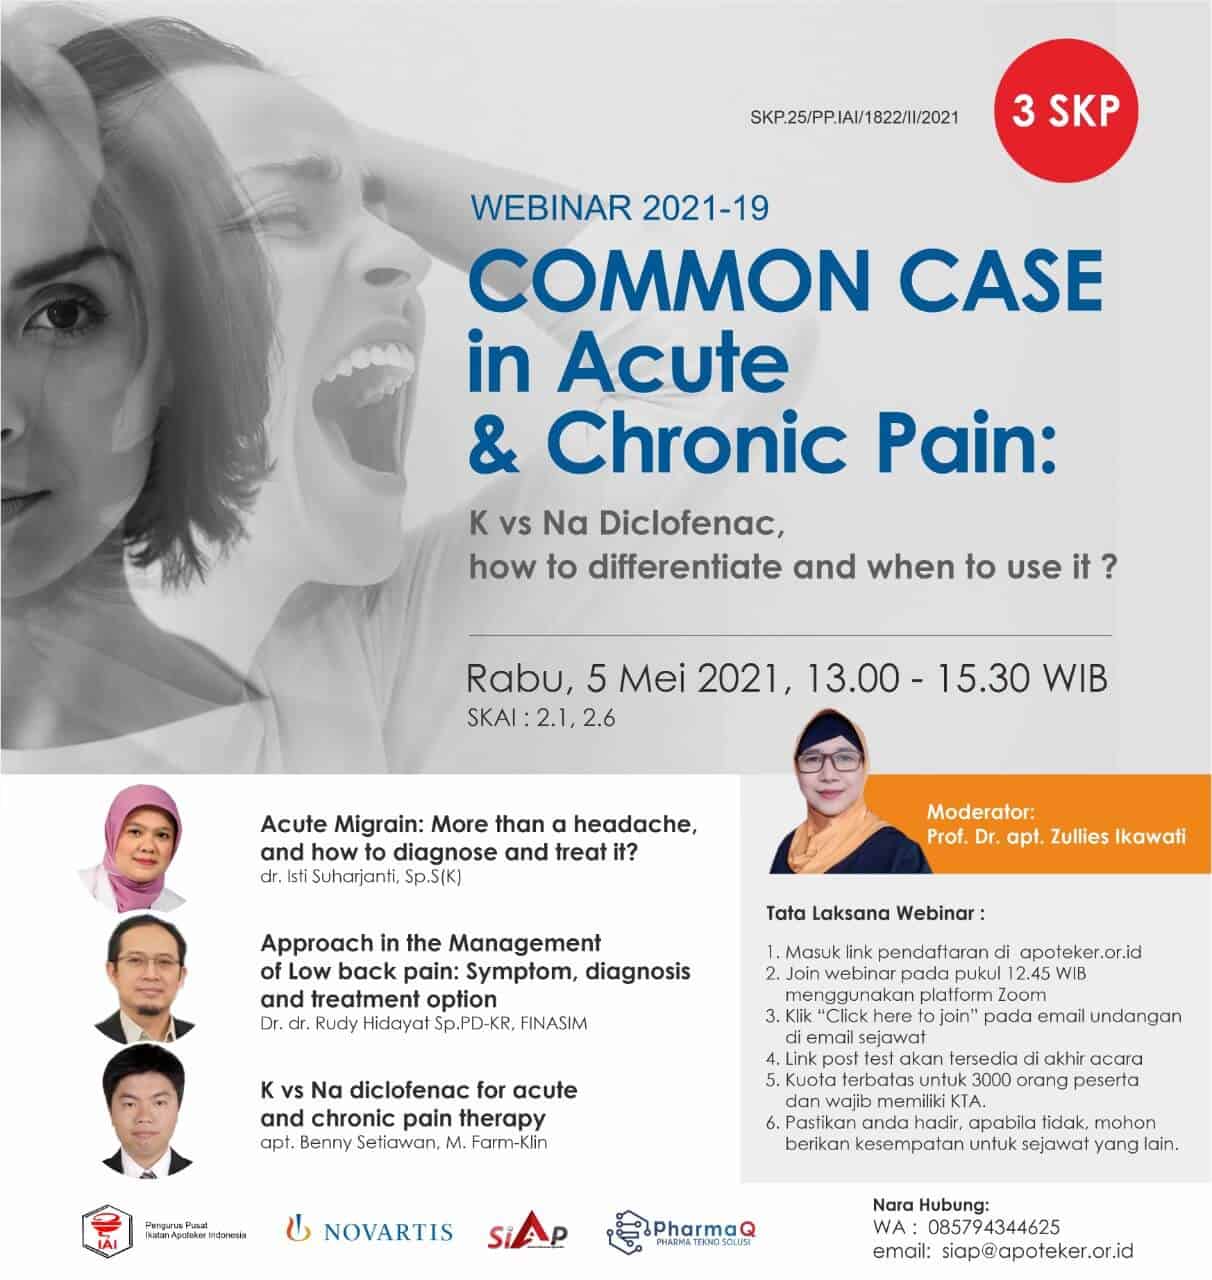 Webinar COMMON CASE in Acute Chronic Pain K vs Na Diclofenac how to differentiate and when to use it